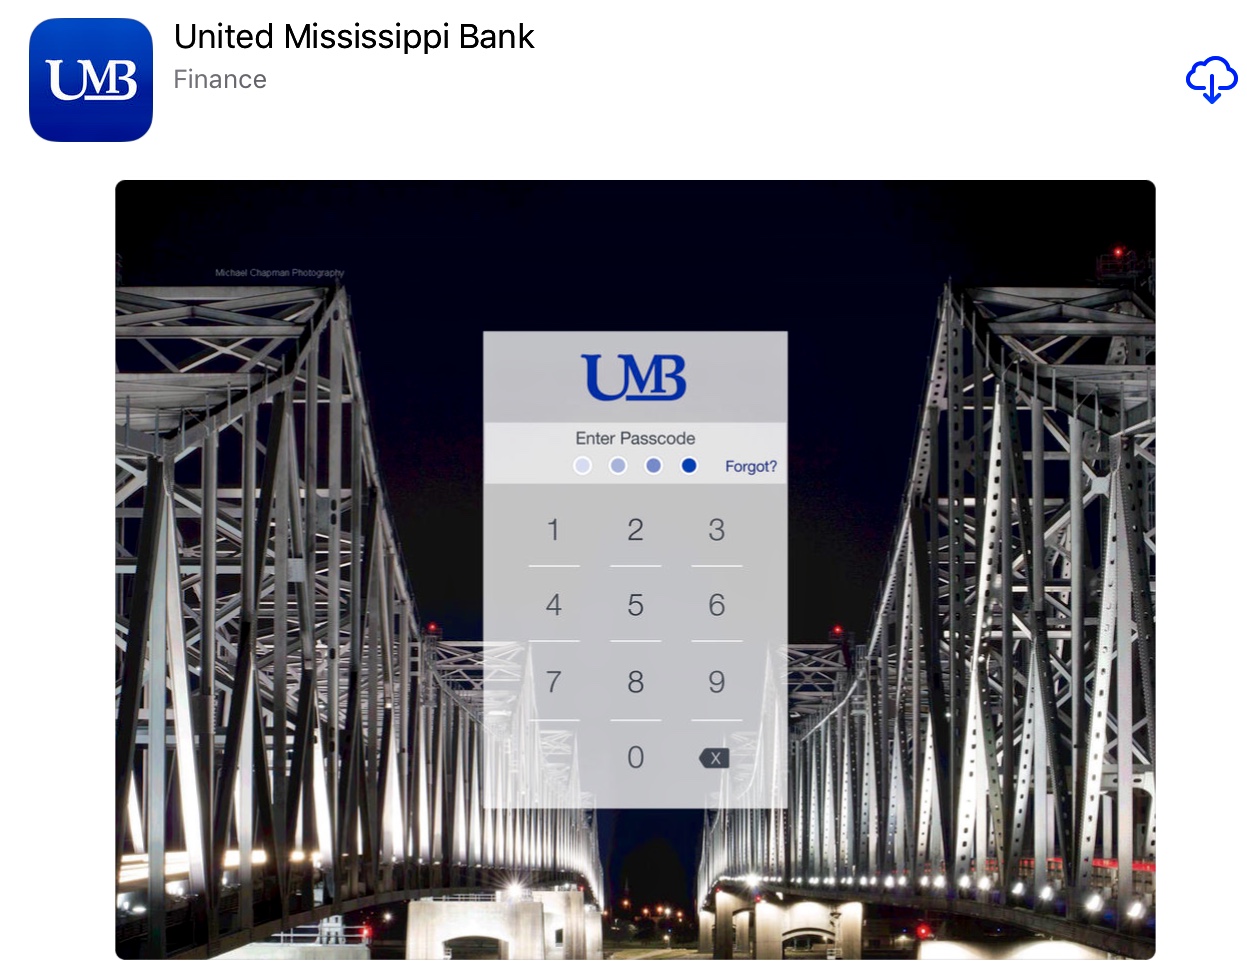 Photo of the UMB mobile app